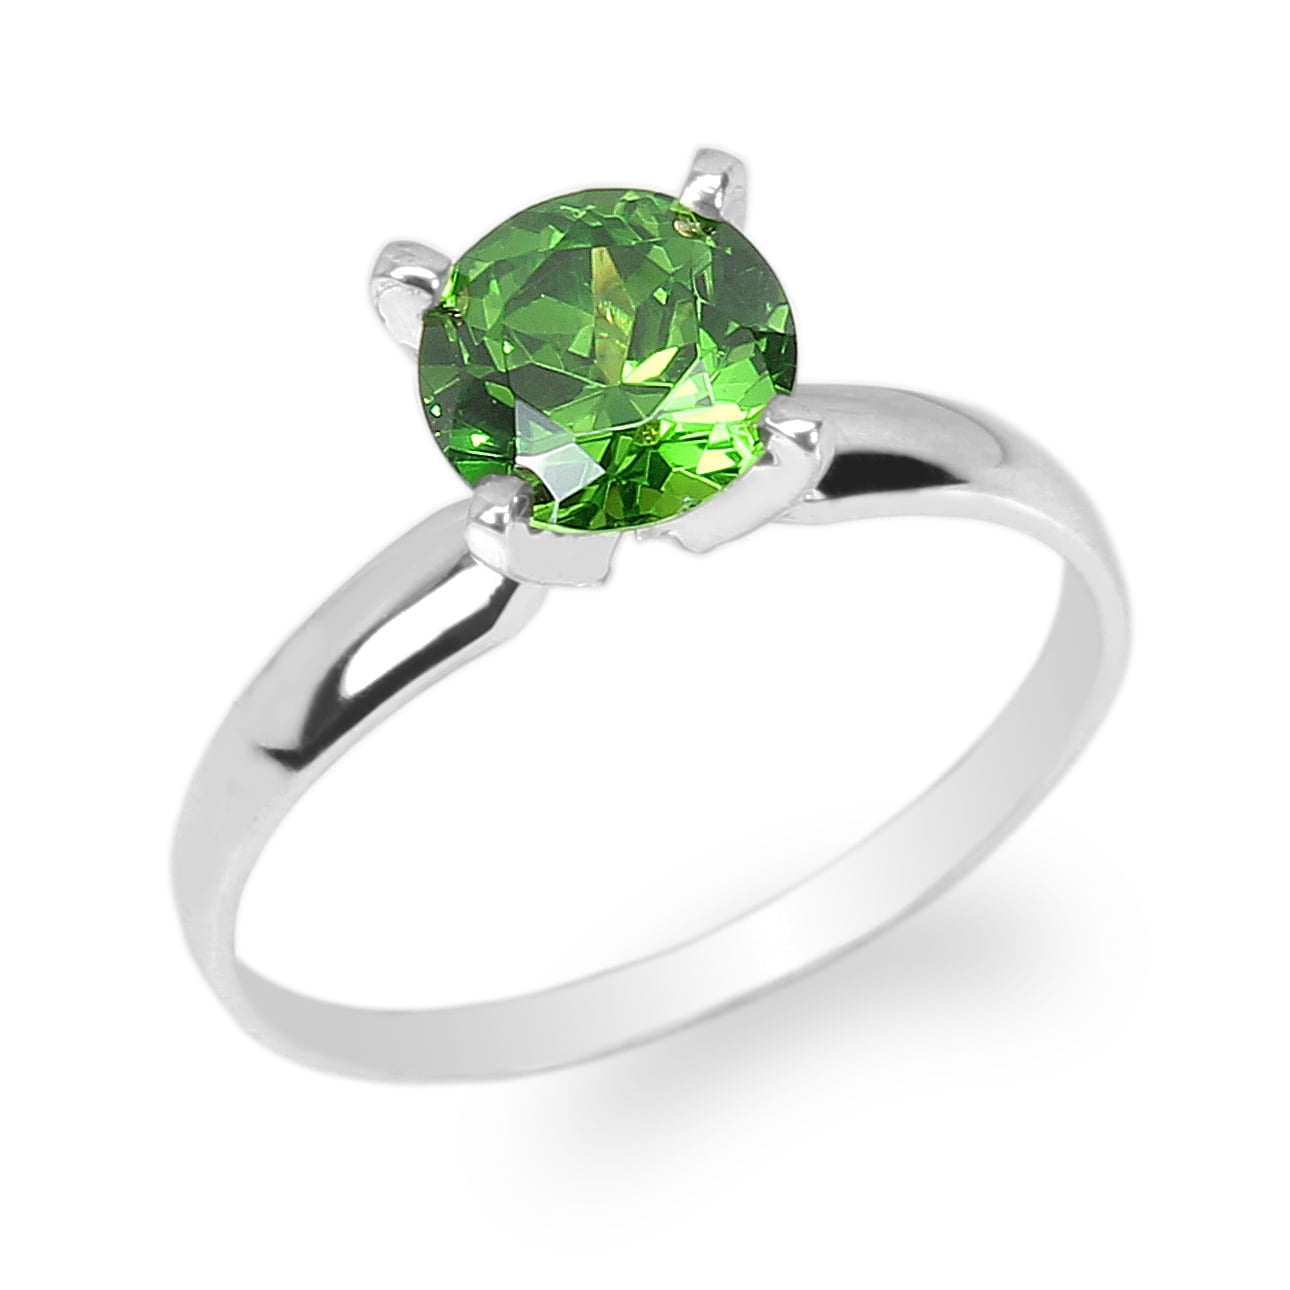 OUTSTANDING 2 CT OVAL PERIDOT GREEN 925 STERLING SILVER RING SIZE 5-10 